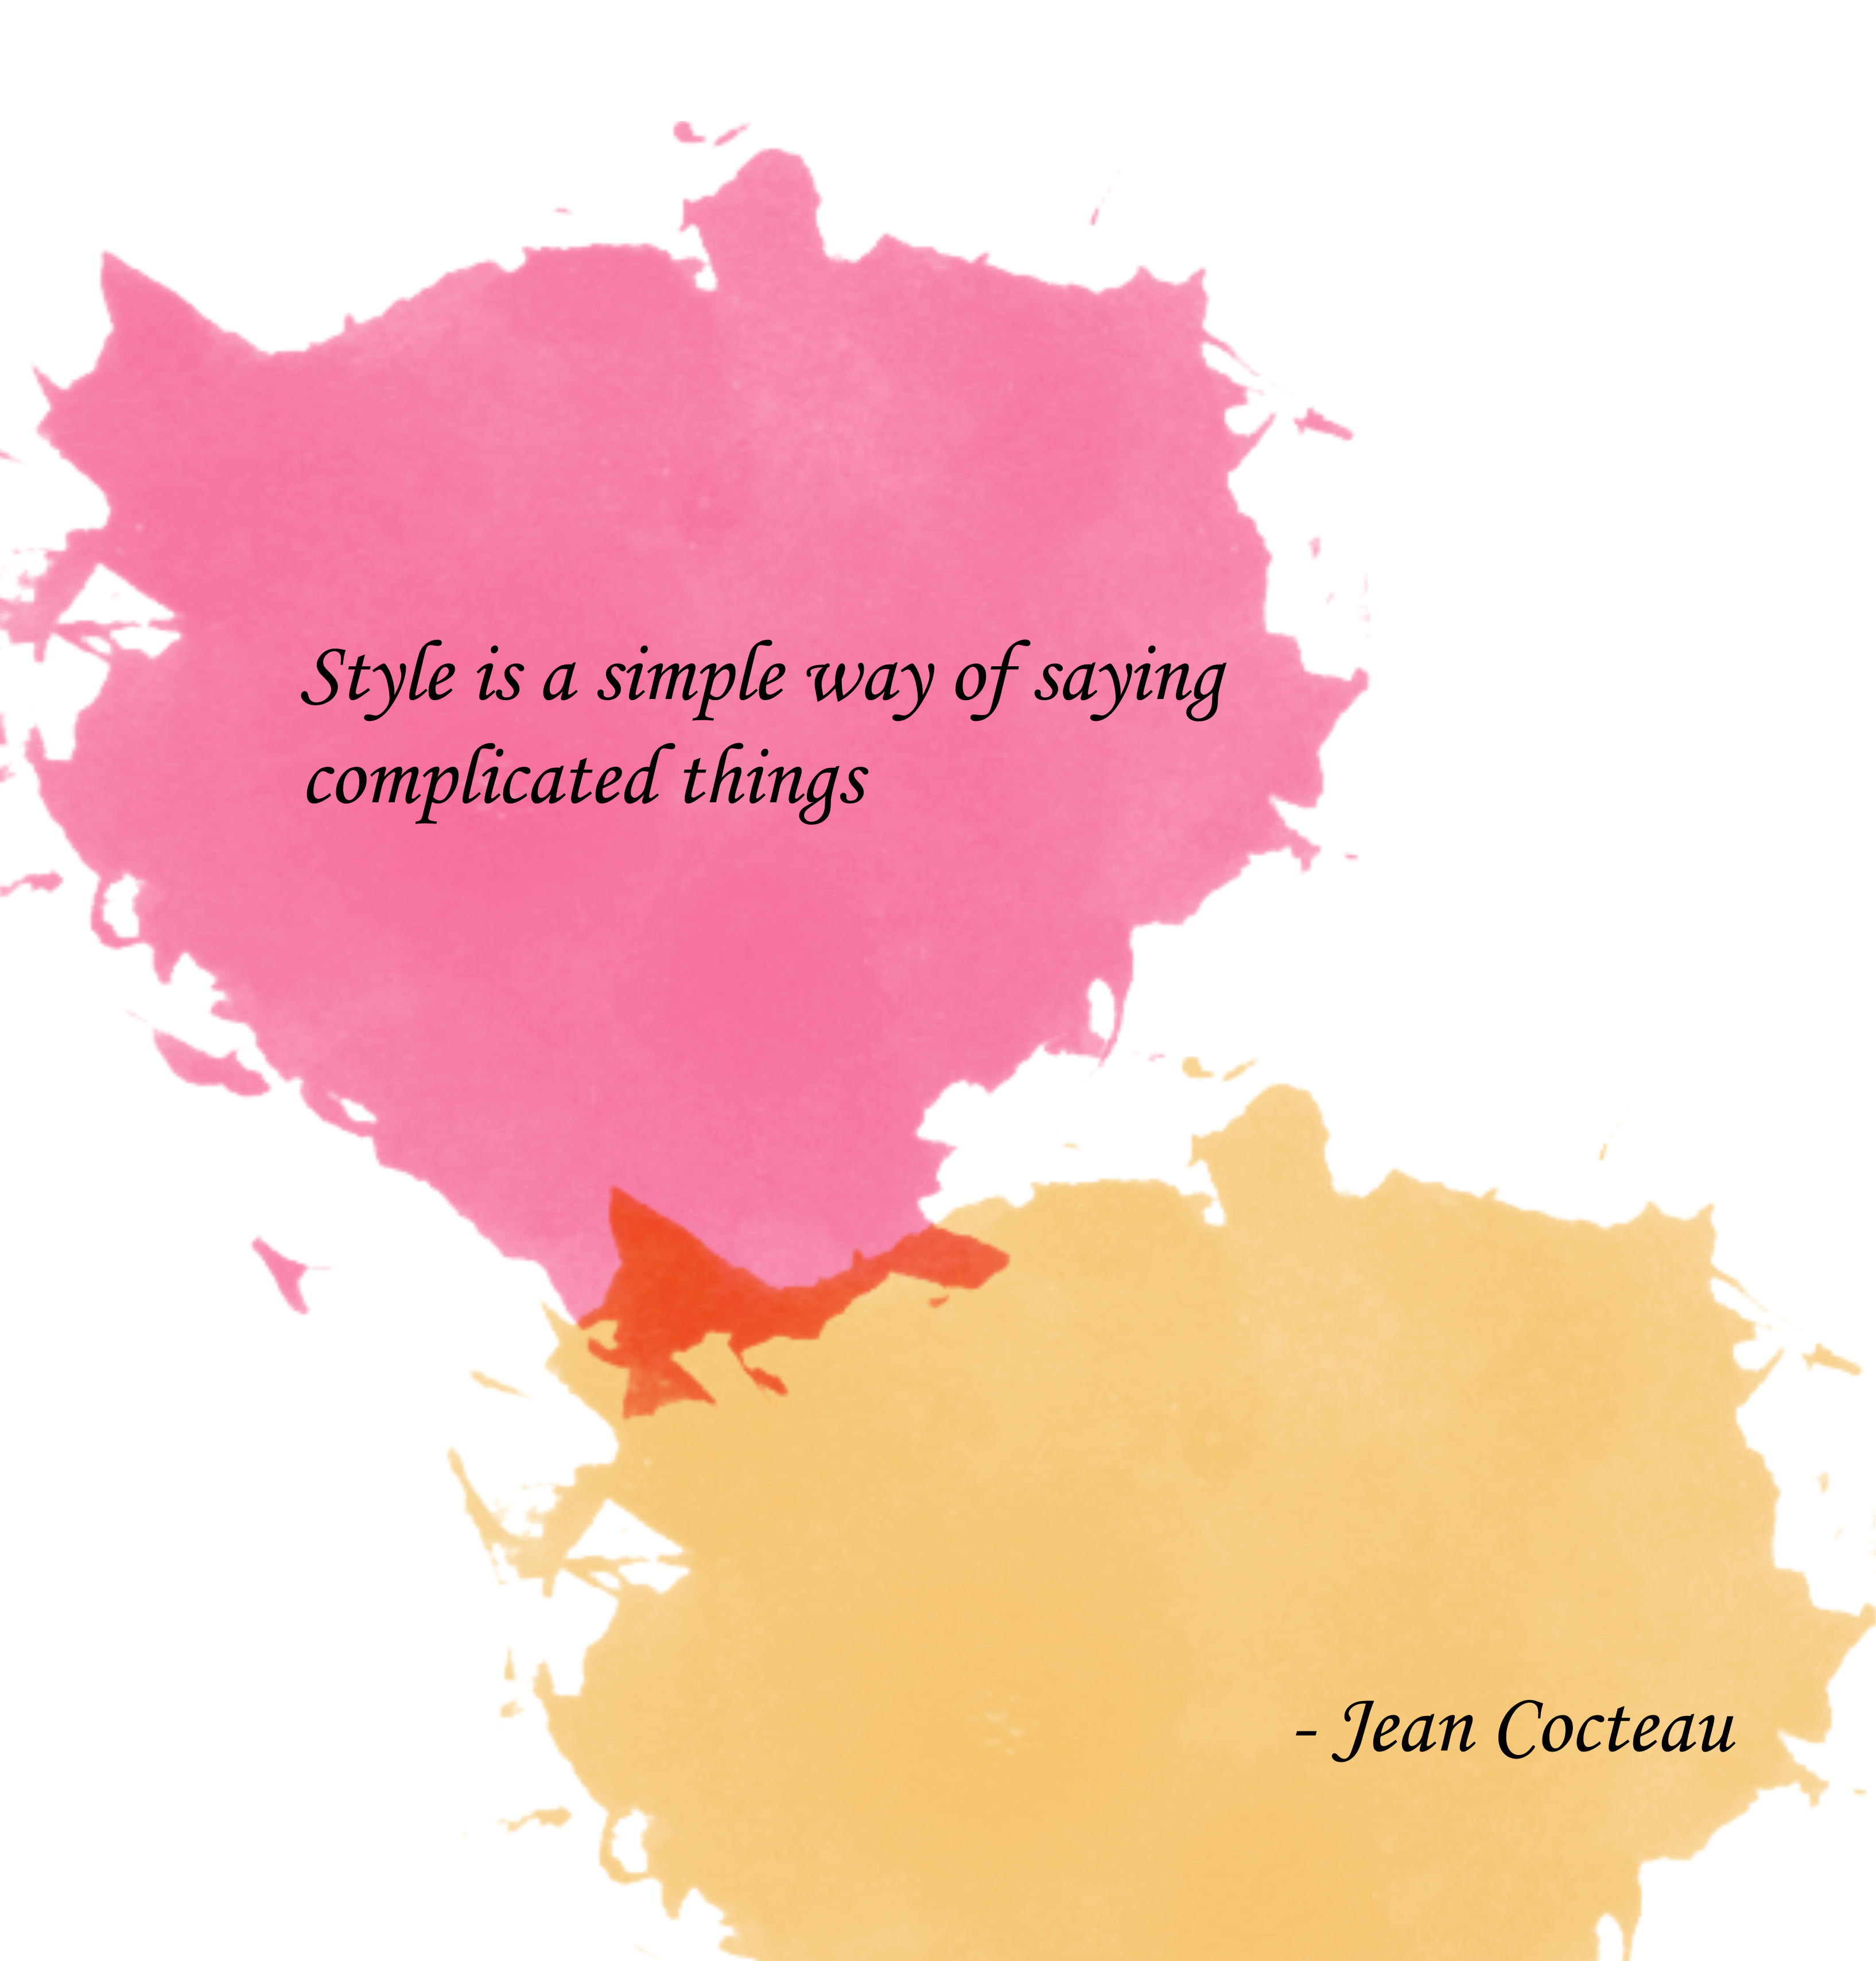 Style is a simple way of saying complicated things